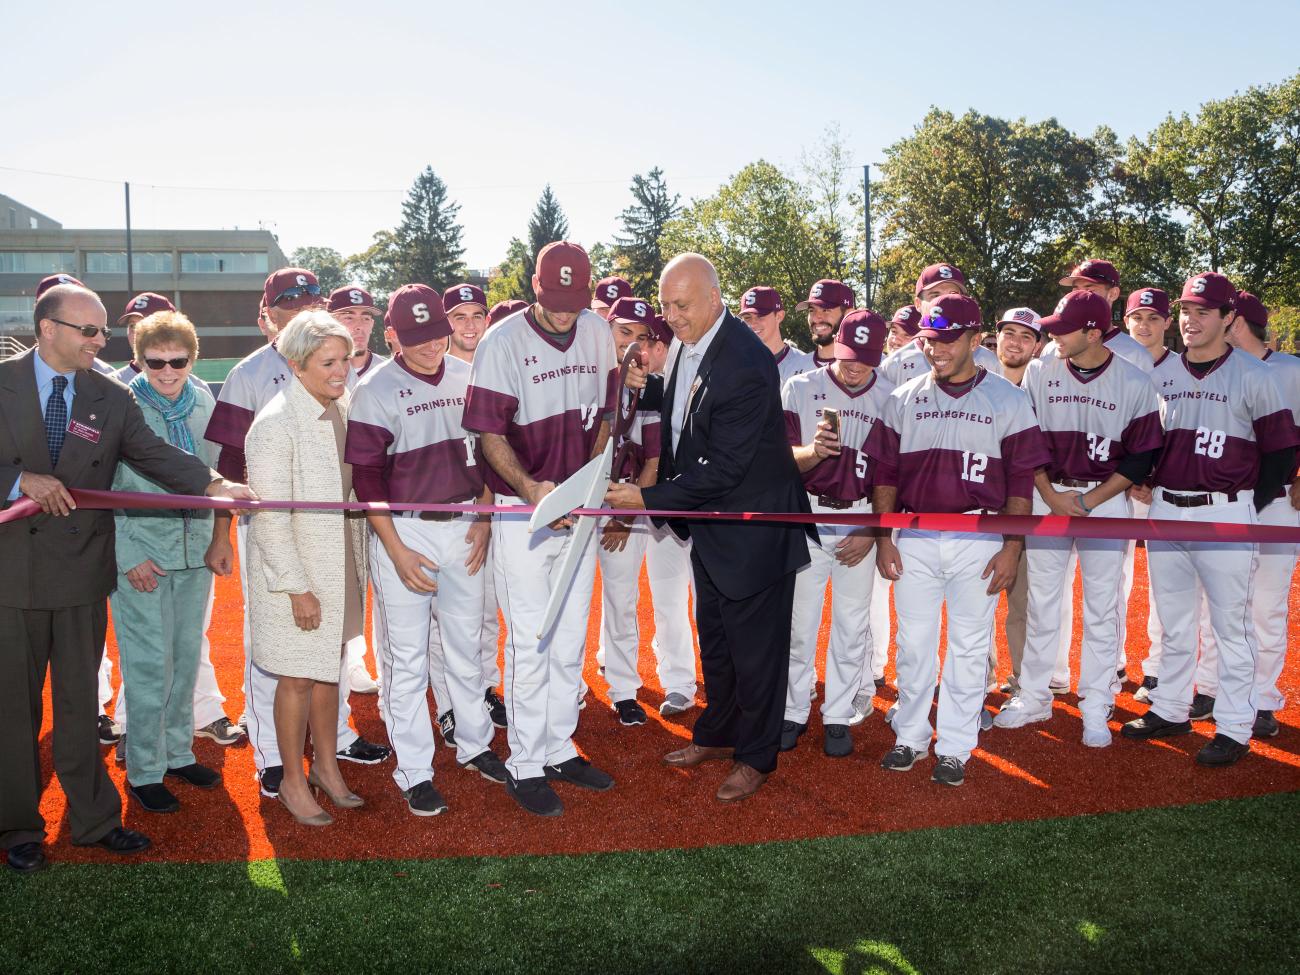 The Springfield College Men's baseball team, college leaders, and Cal Ripken Jr. join together to cut the ribbon on the new adaptive field.